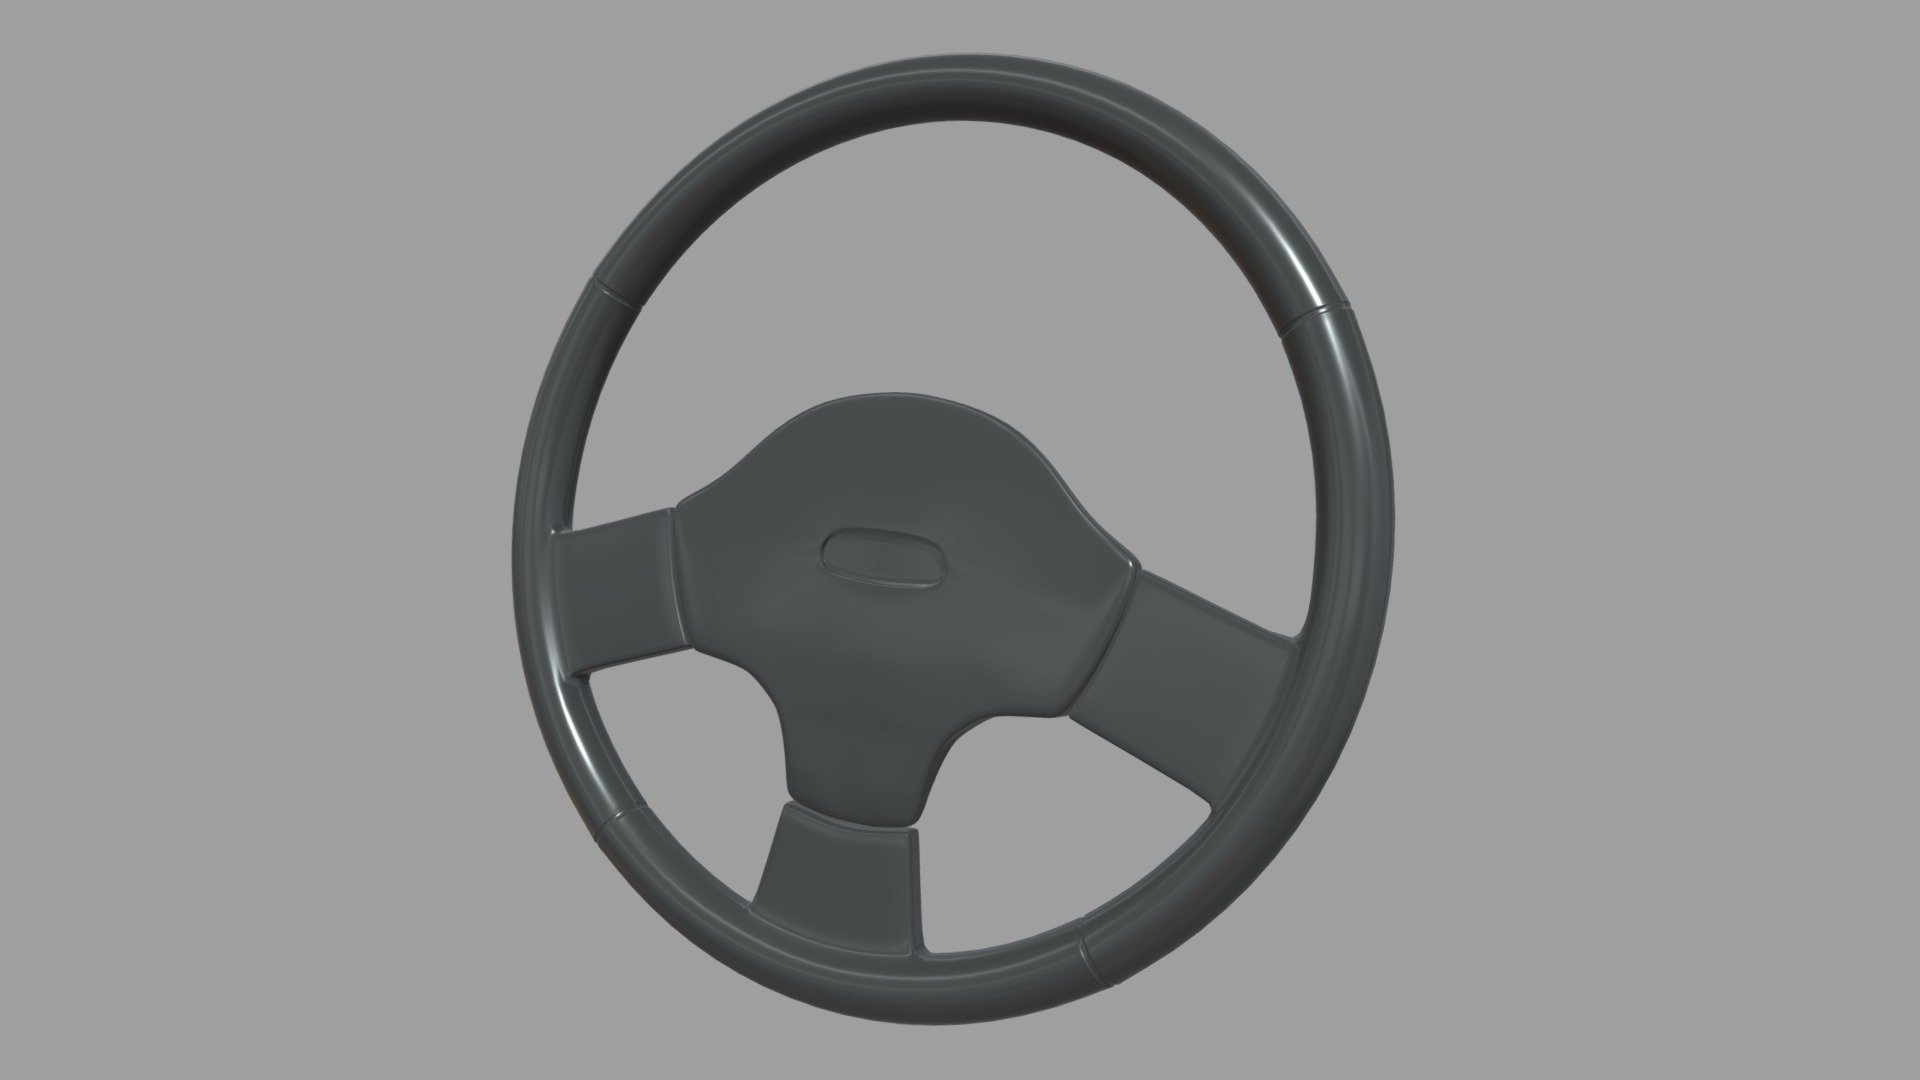 This model contains an Steering Wheel Car 02 based on a real stylized steering wheel from a real car which i modeled in Maya 2018.This model is perfect to create a new great scene with different car pieces or part of a car model.

This model could be available for the 3D printing, the STL is added and work correctly in Ultimaker Cura. If you have any problem contact me.

The model is ready as one unique part and ready for being a great CGI model and also a 3D printable model.

This model is one of a great collection of car parts i published in my profile, which is available for buying.

If you need any kind of help contact me, i will help you with everything i can. If you like the model please give me some feedback, I would appreciate it.

Don’t doubt on contacting me, i would be very happy to help. If you experience any kind of difficulties, be sure to contact me and i will help you. Sincerely Yours, ViperJr3D - Steering Wheel Car 02 - Buy Royalty Free 3D model by ViperJr3D 3d model